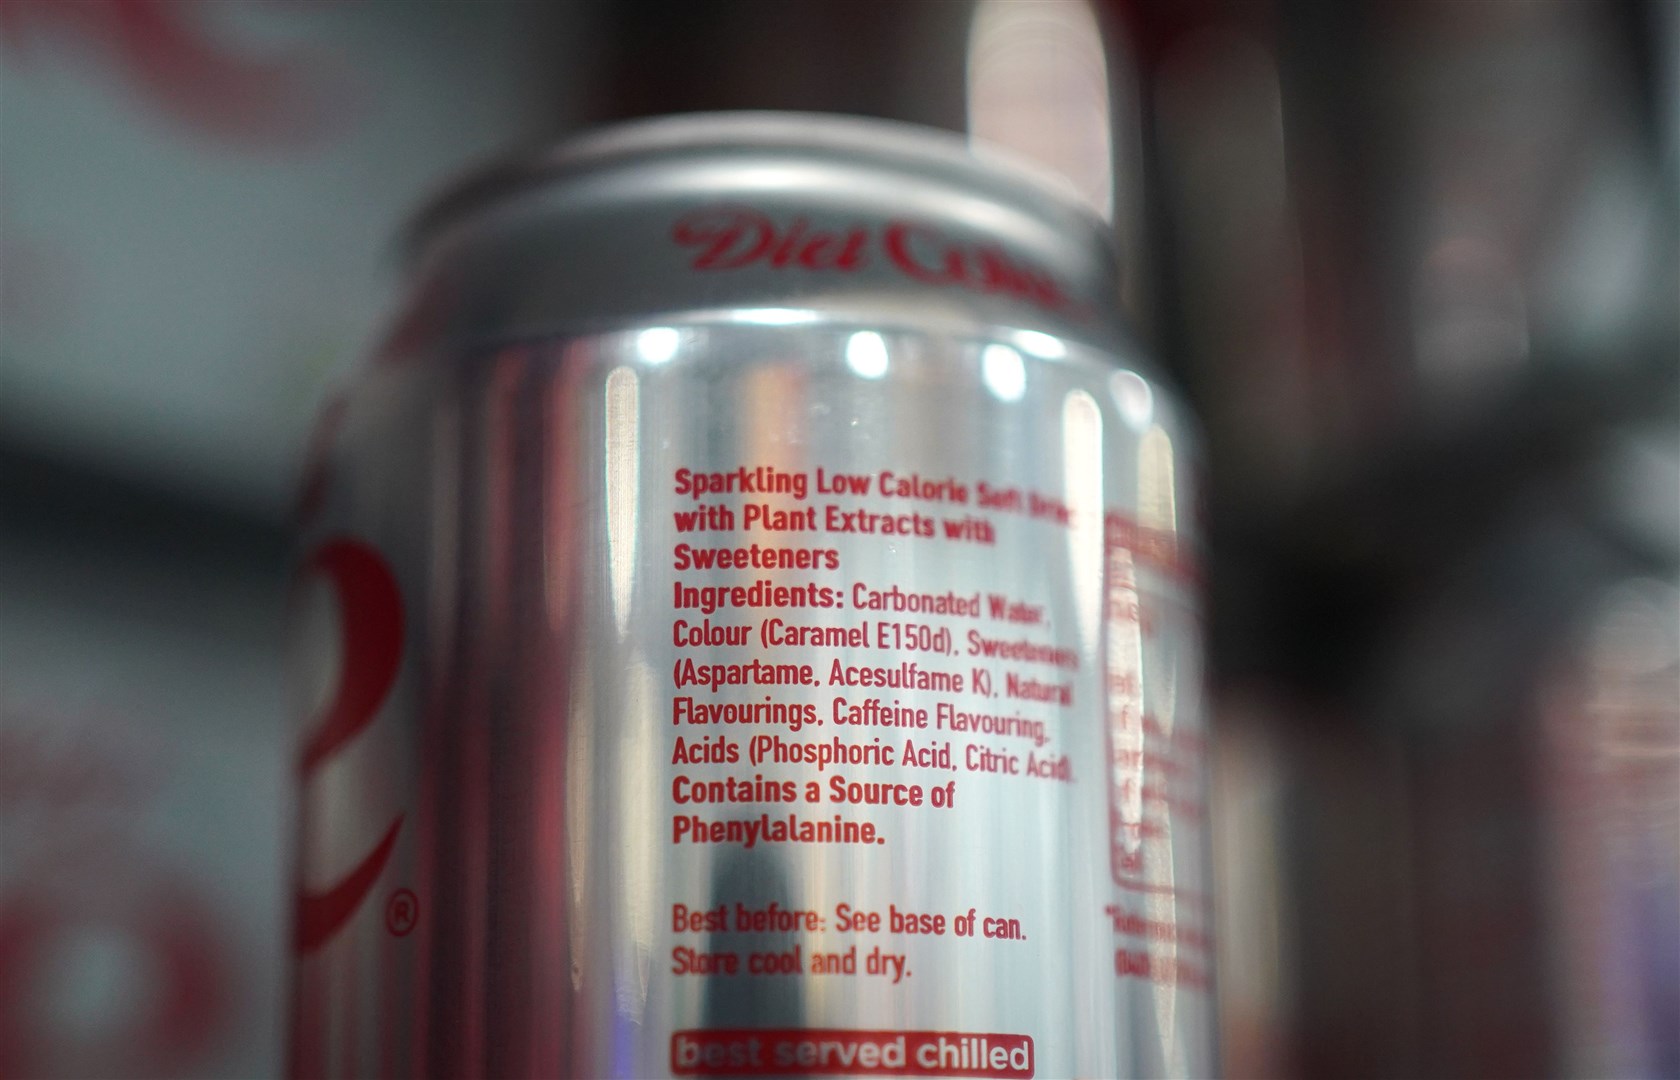 Aspartame appears as a sweetener in cans of Diet Coke (PA)